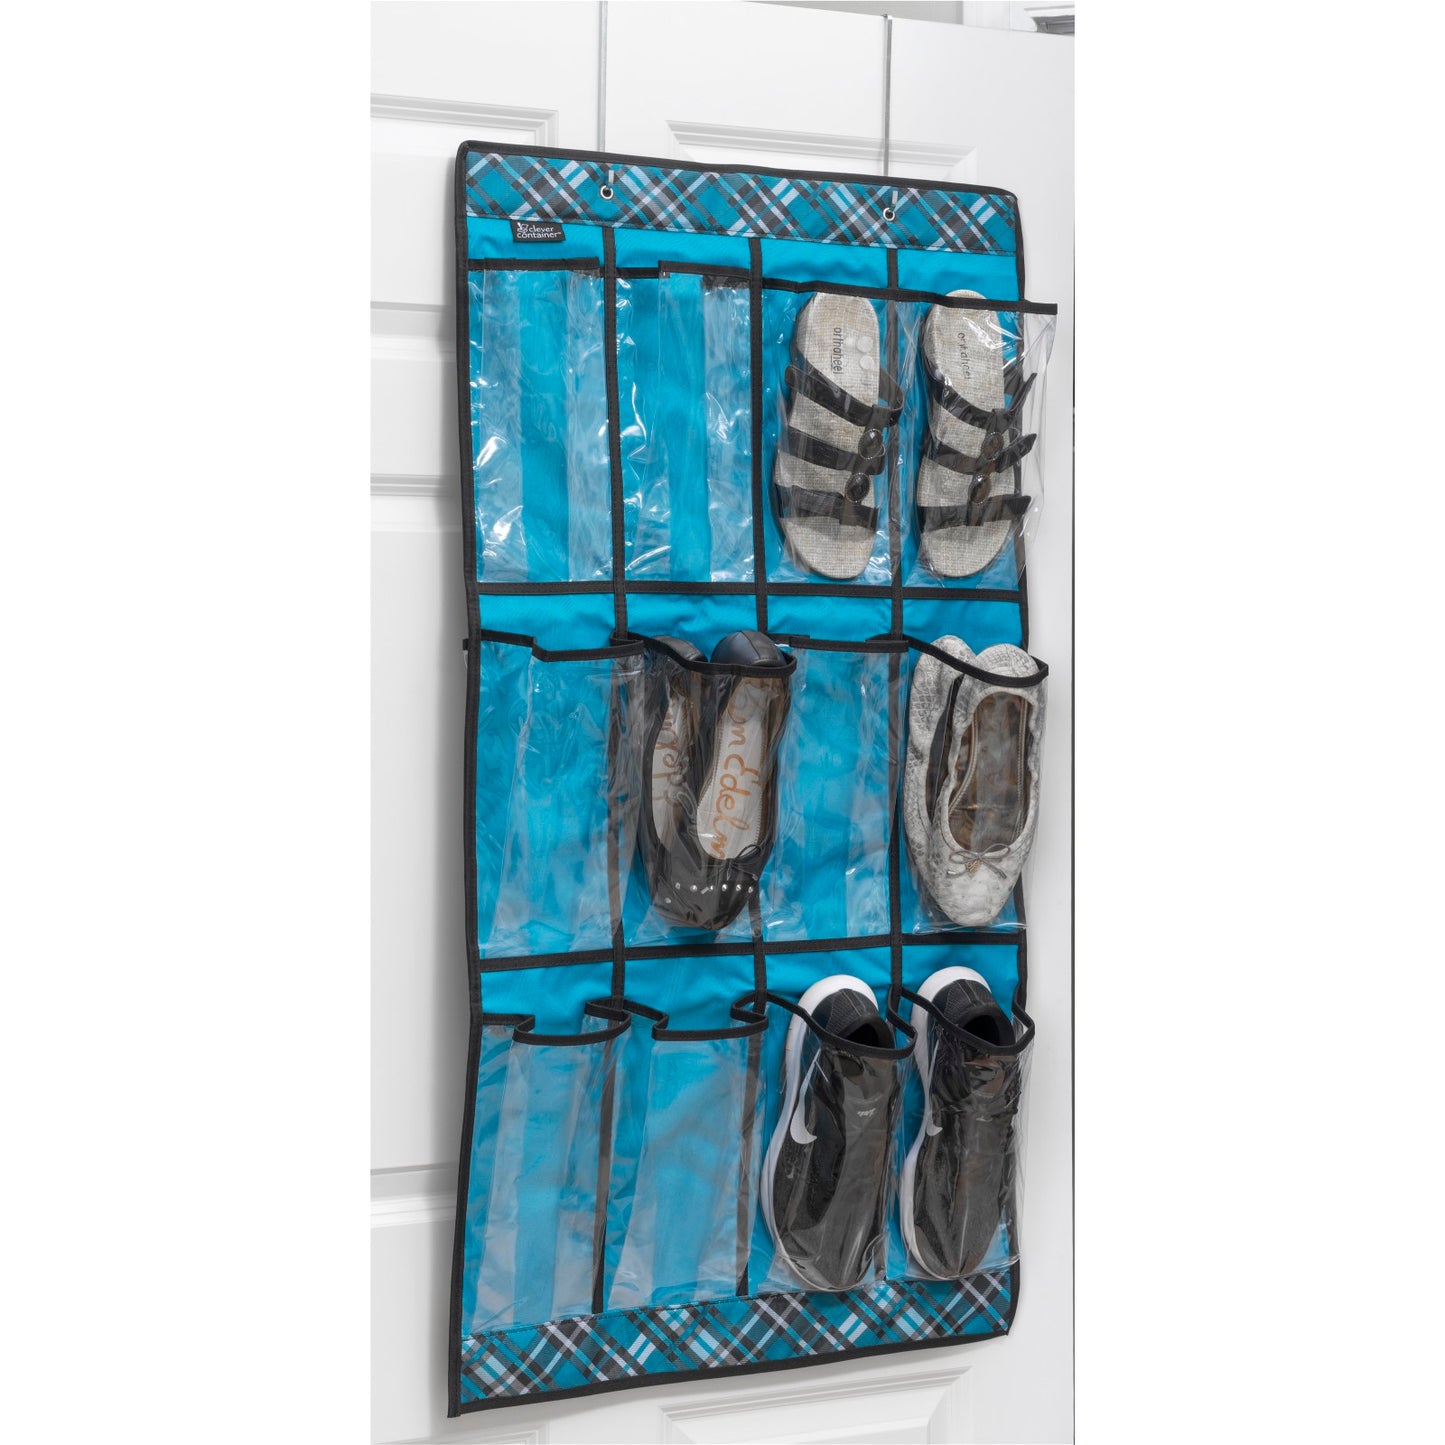 Hanging Pocket Cubby - Teal Plaid